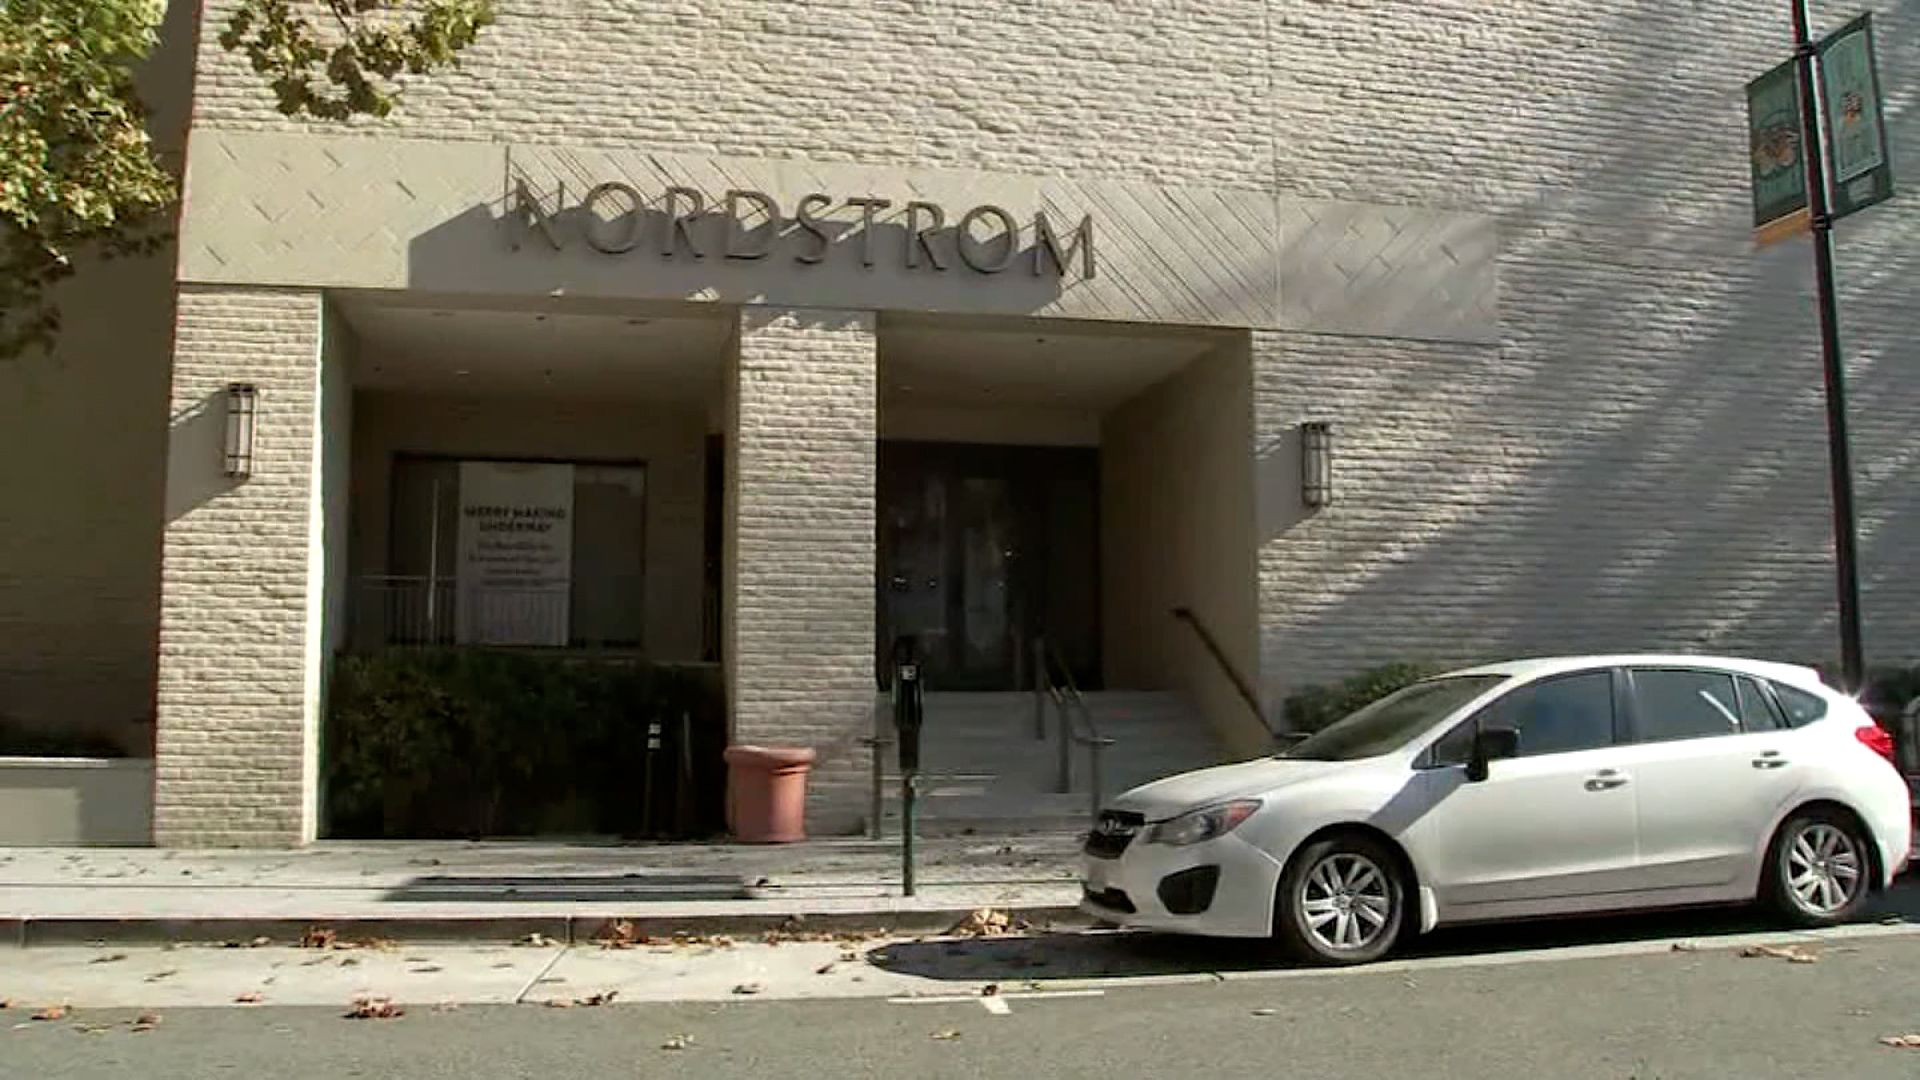 Nordstrom looting in Walnut Creek follows looting in Union Square